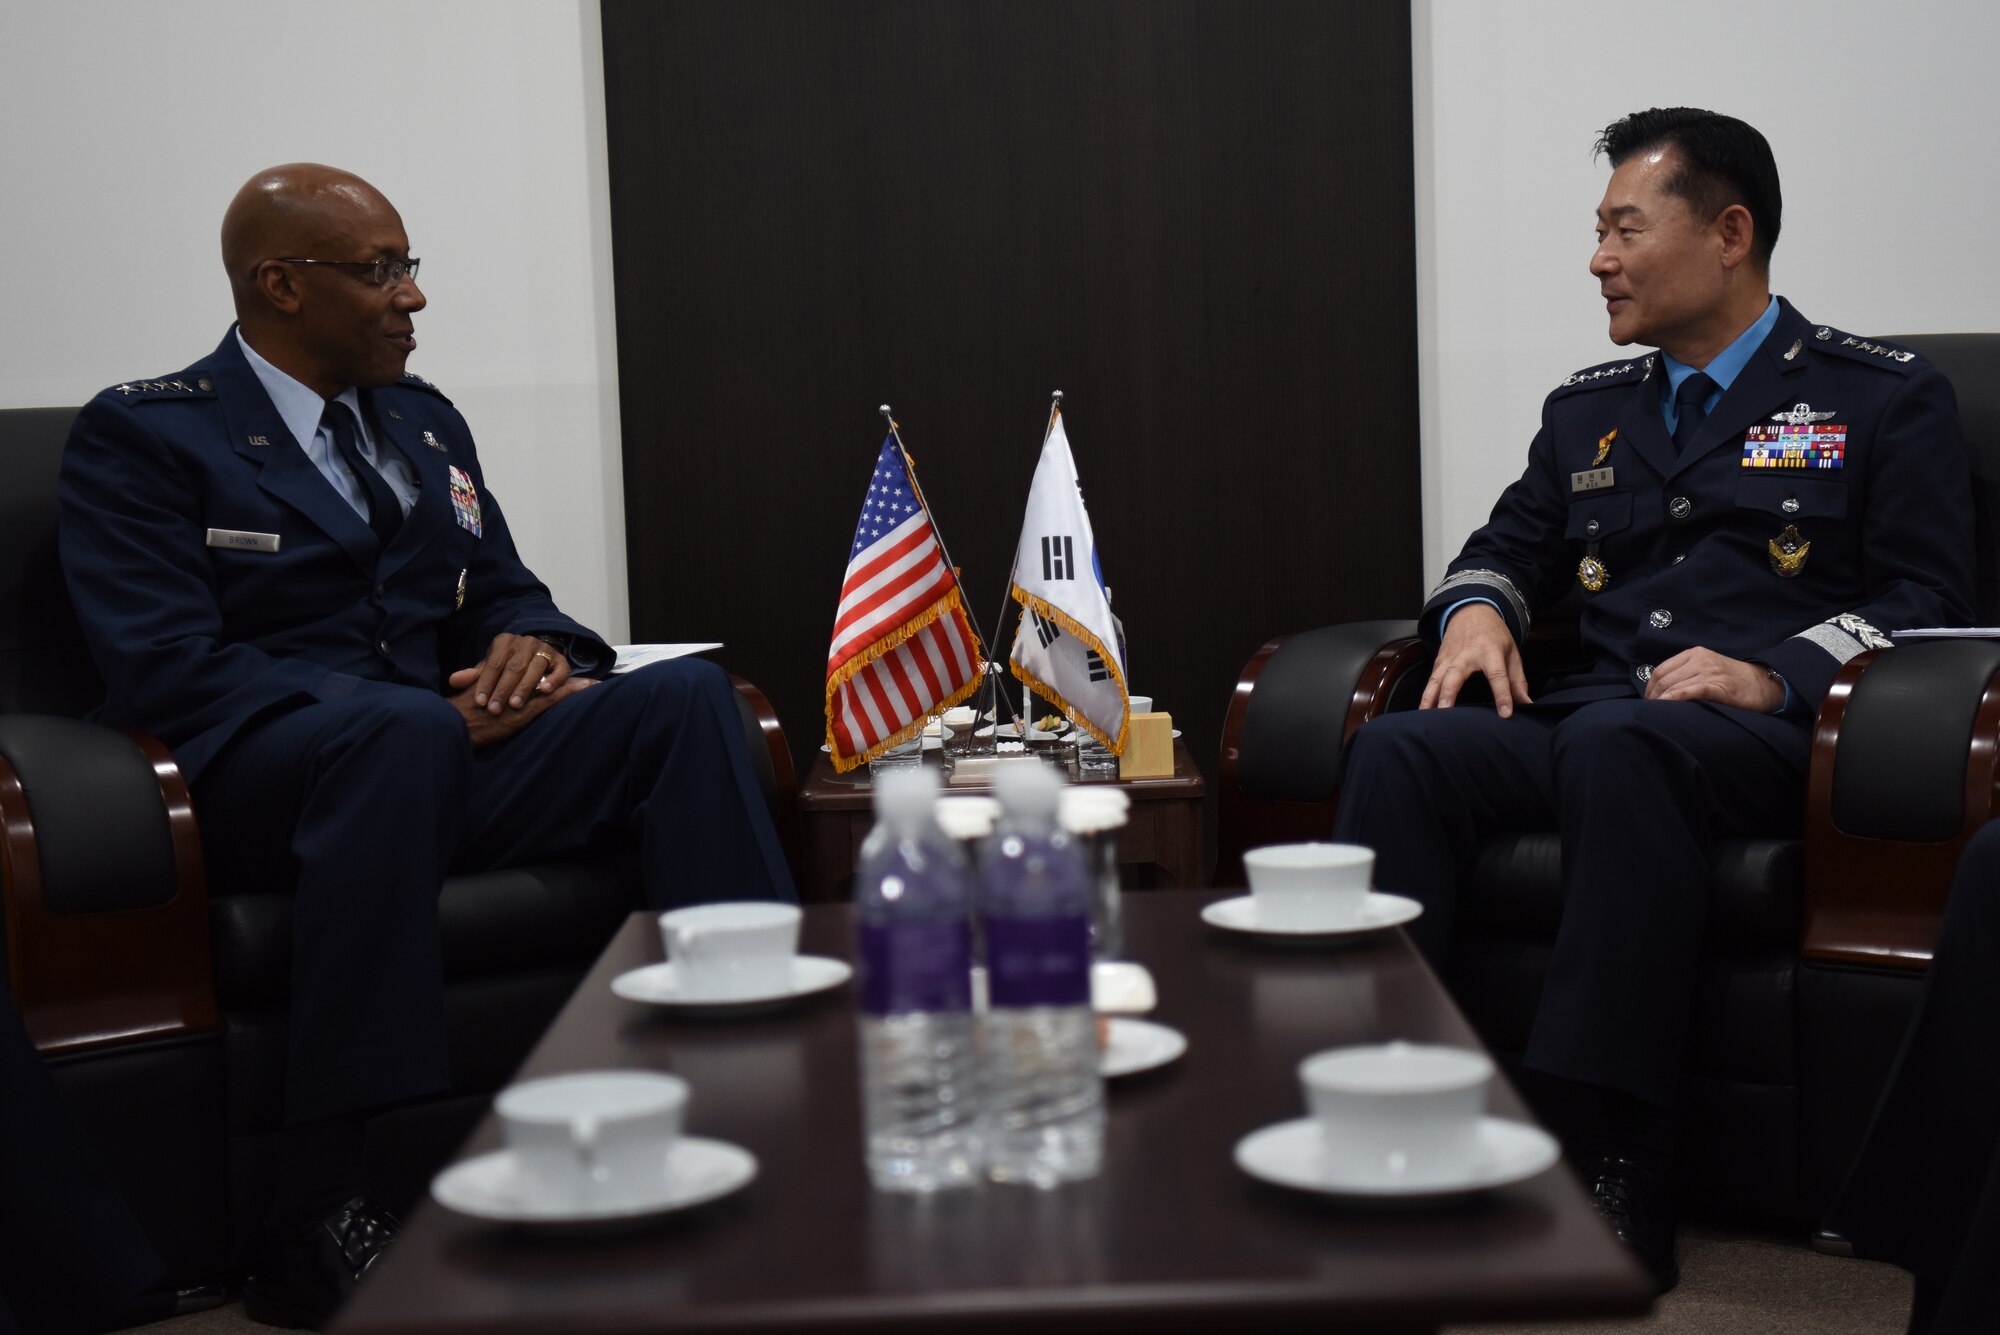 Gen. CQ. Brown, Jr., Pacific Air Forces commander, meets with Gen. Won In-Choul, Republic of Korea Air Force Chief of Staff, during a bilateral engagement at the Seoul International Aerospace and Defense Exhibition 2019 at the Seoul Airport, Republic of Korea, October 16, 2019. This year marked the 70th anniversary of the ROKAF and 70 years of unity between the U.S. and Republic of Korea air forces. Supporting airshows and other regional events allows the U.S. to demonstrate its commitment to the stability and security of the Indo-Pacific region. (U.S. Air Force photo by Senior Airman Denise M. Jenson)